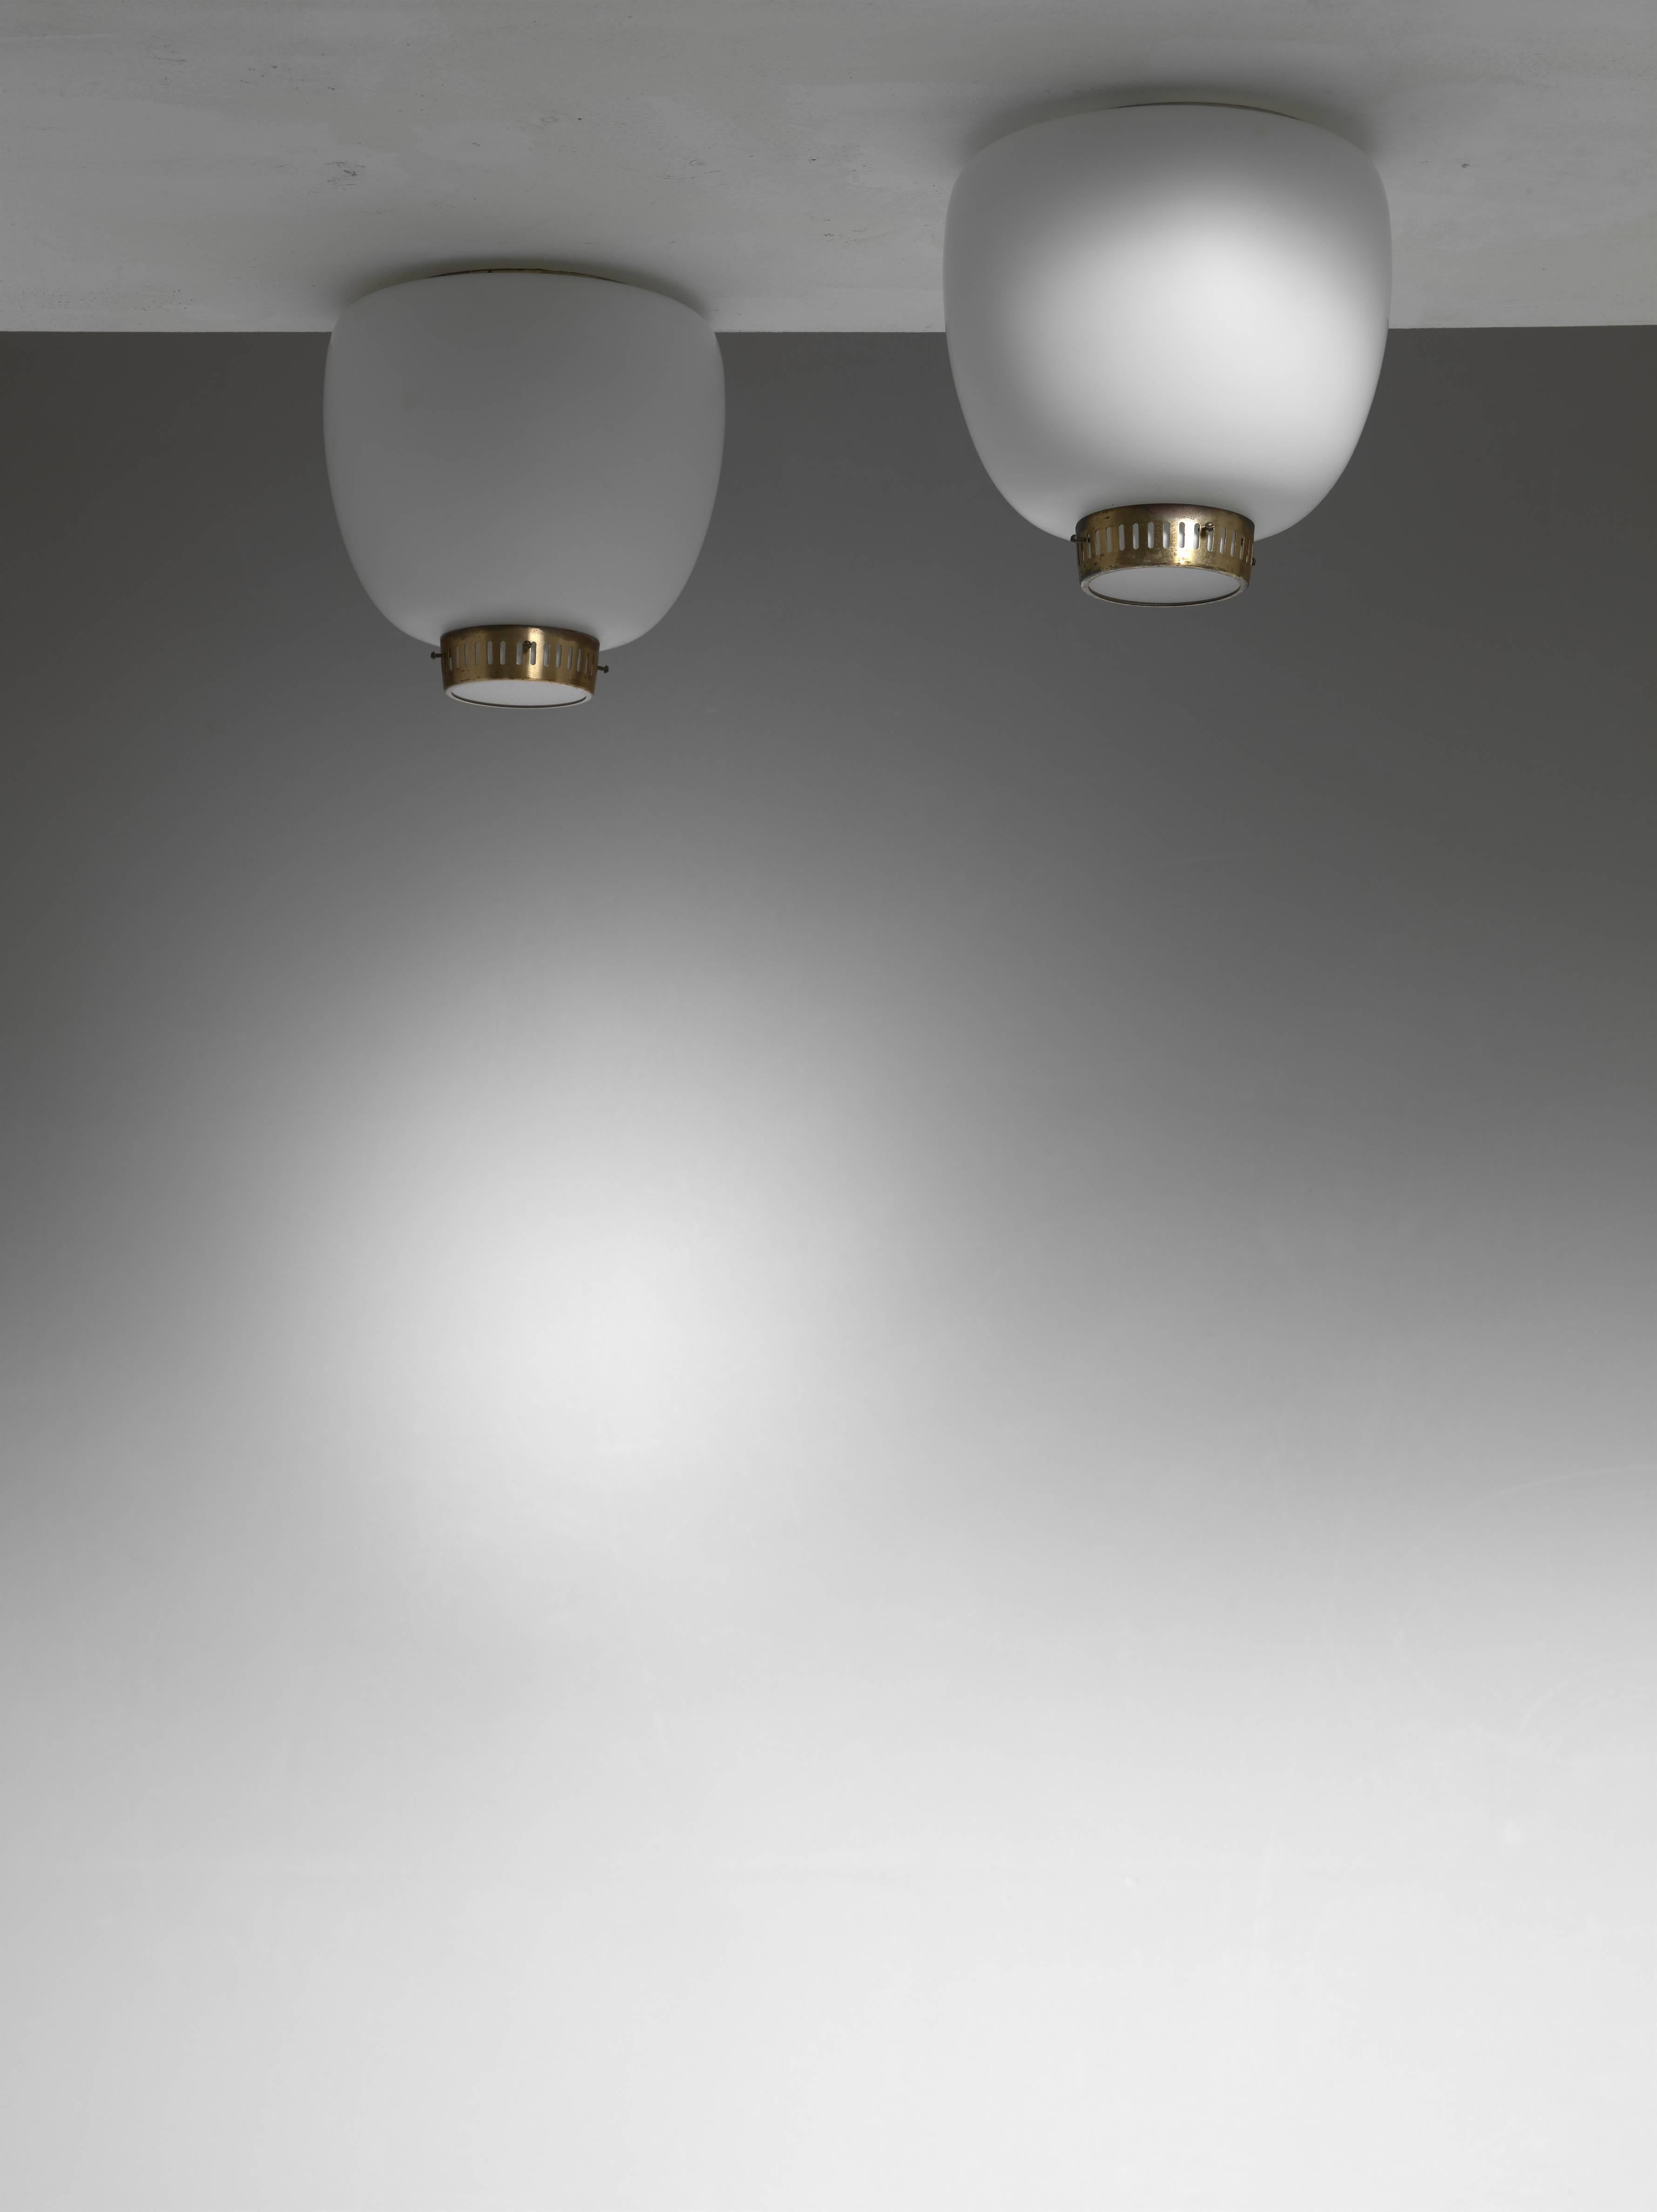 A pair of model 'Kina' opaline glass and brass flush mount ceiling lamps by Bent Karlby for Lyfa.

The lamps are made of an opaline glass shade and a brass ring underneath with a frosted glass diffuser.

We have a second pair available.

* This